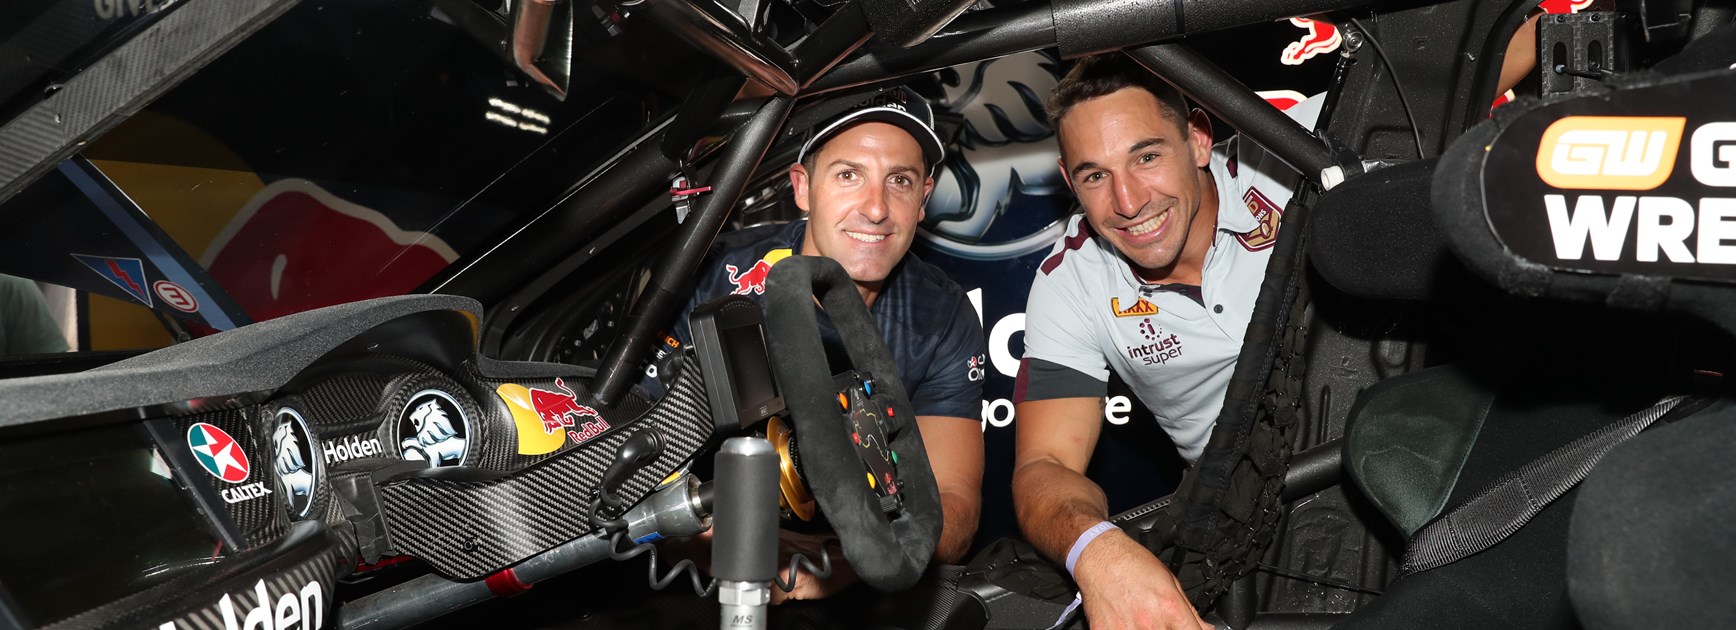 Supercar champion Jamie Whincup and Storm fullback Billy Slater.